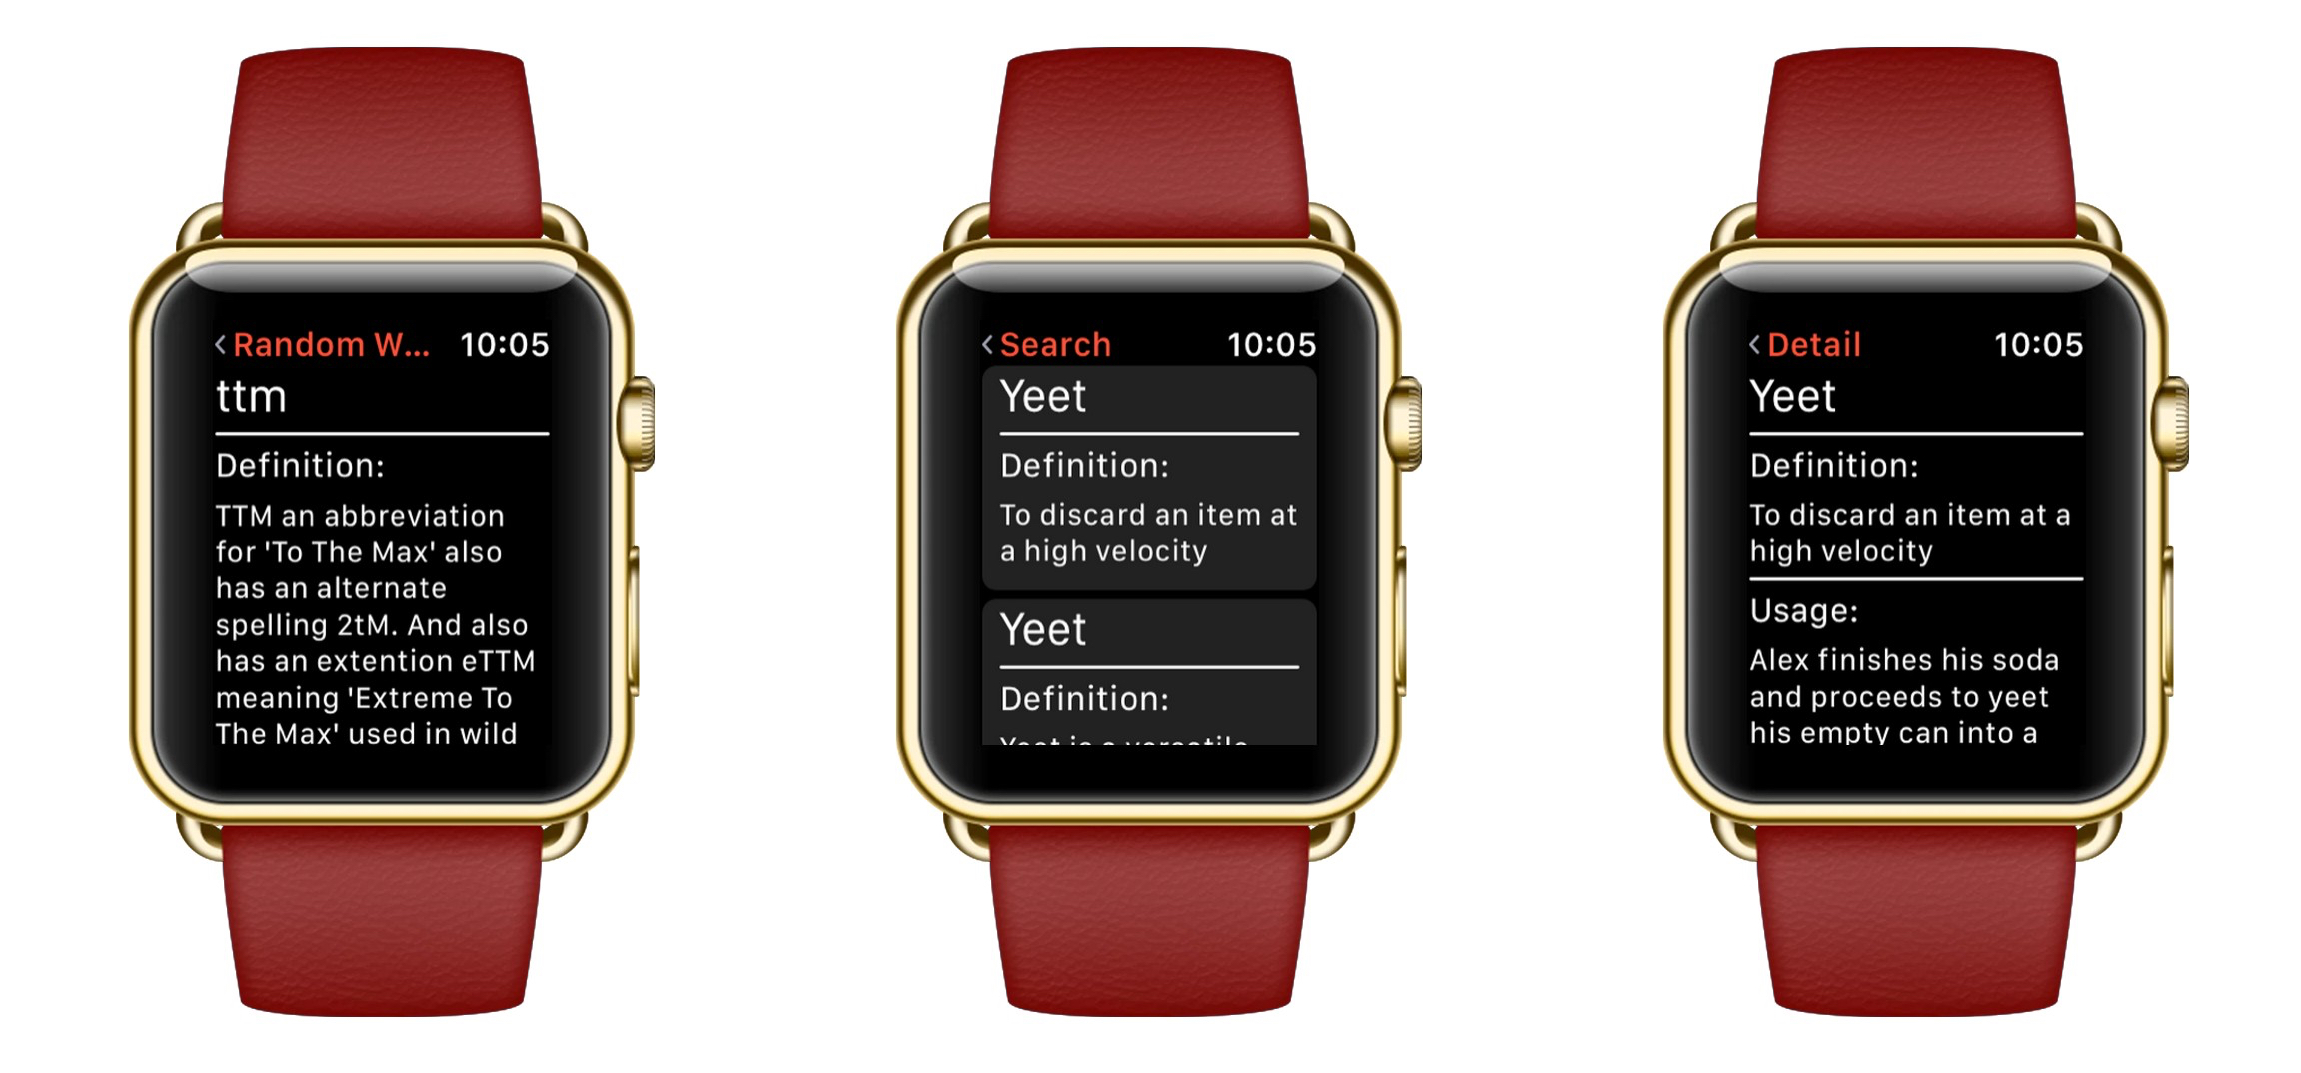 UrbanWatch for Apple Watch Brings the Urban Dictionary to Your Wrist